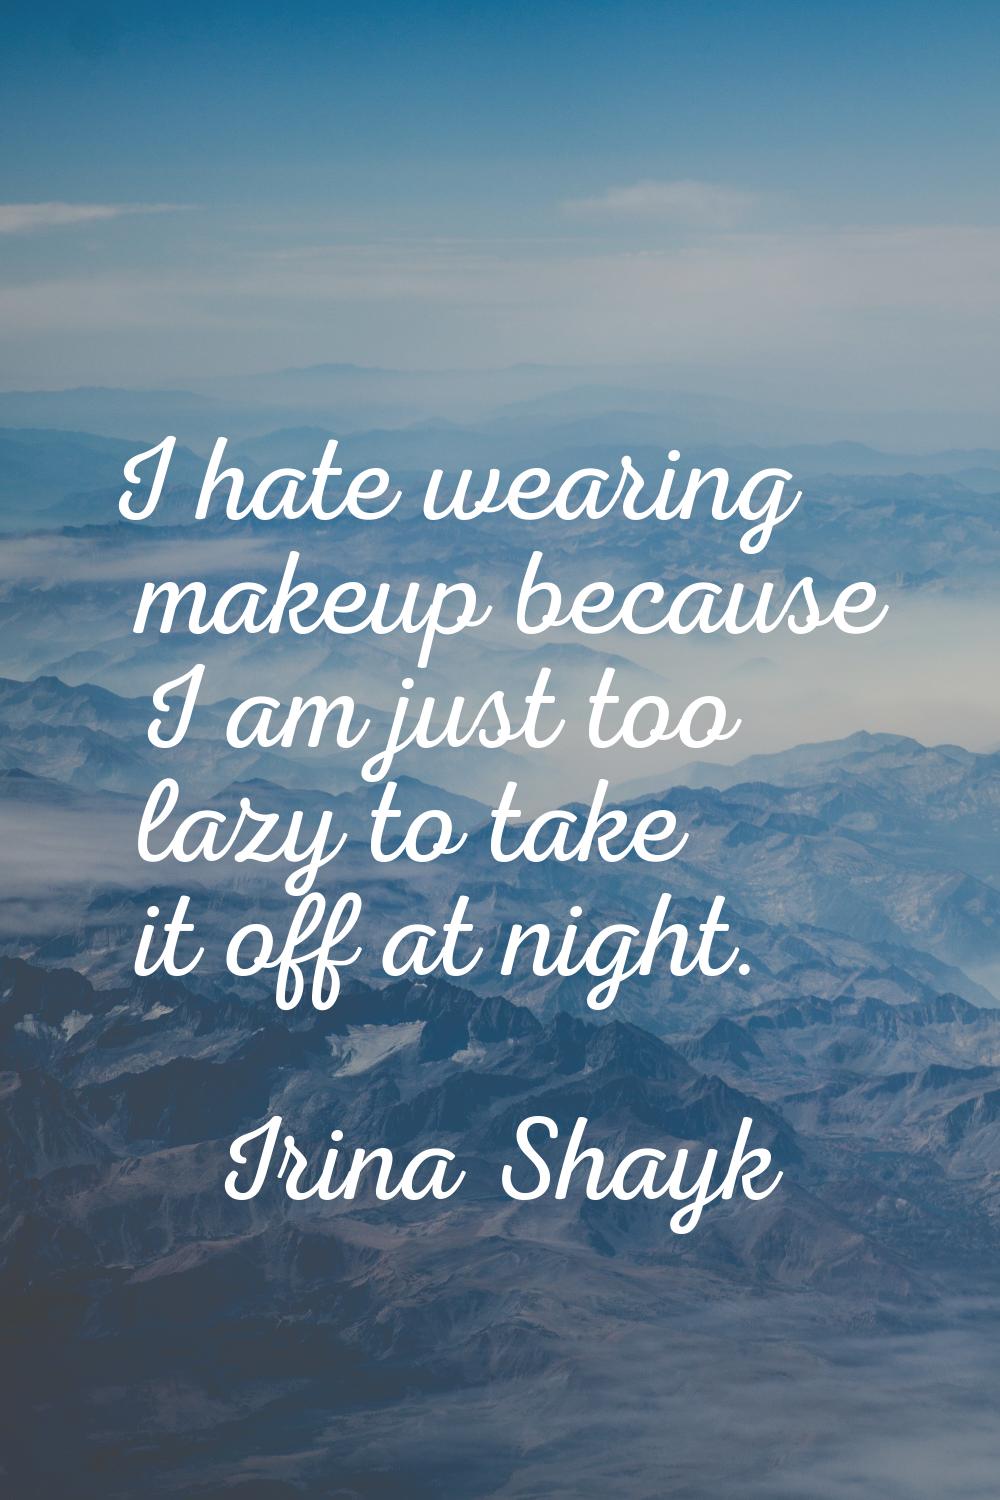 I hate wearing makeup because I am just too lazy to take it off at night.